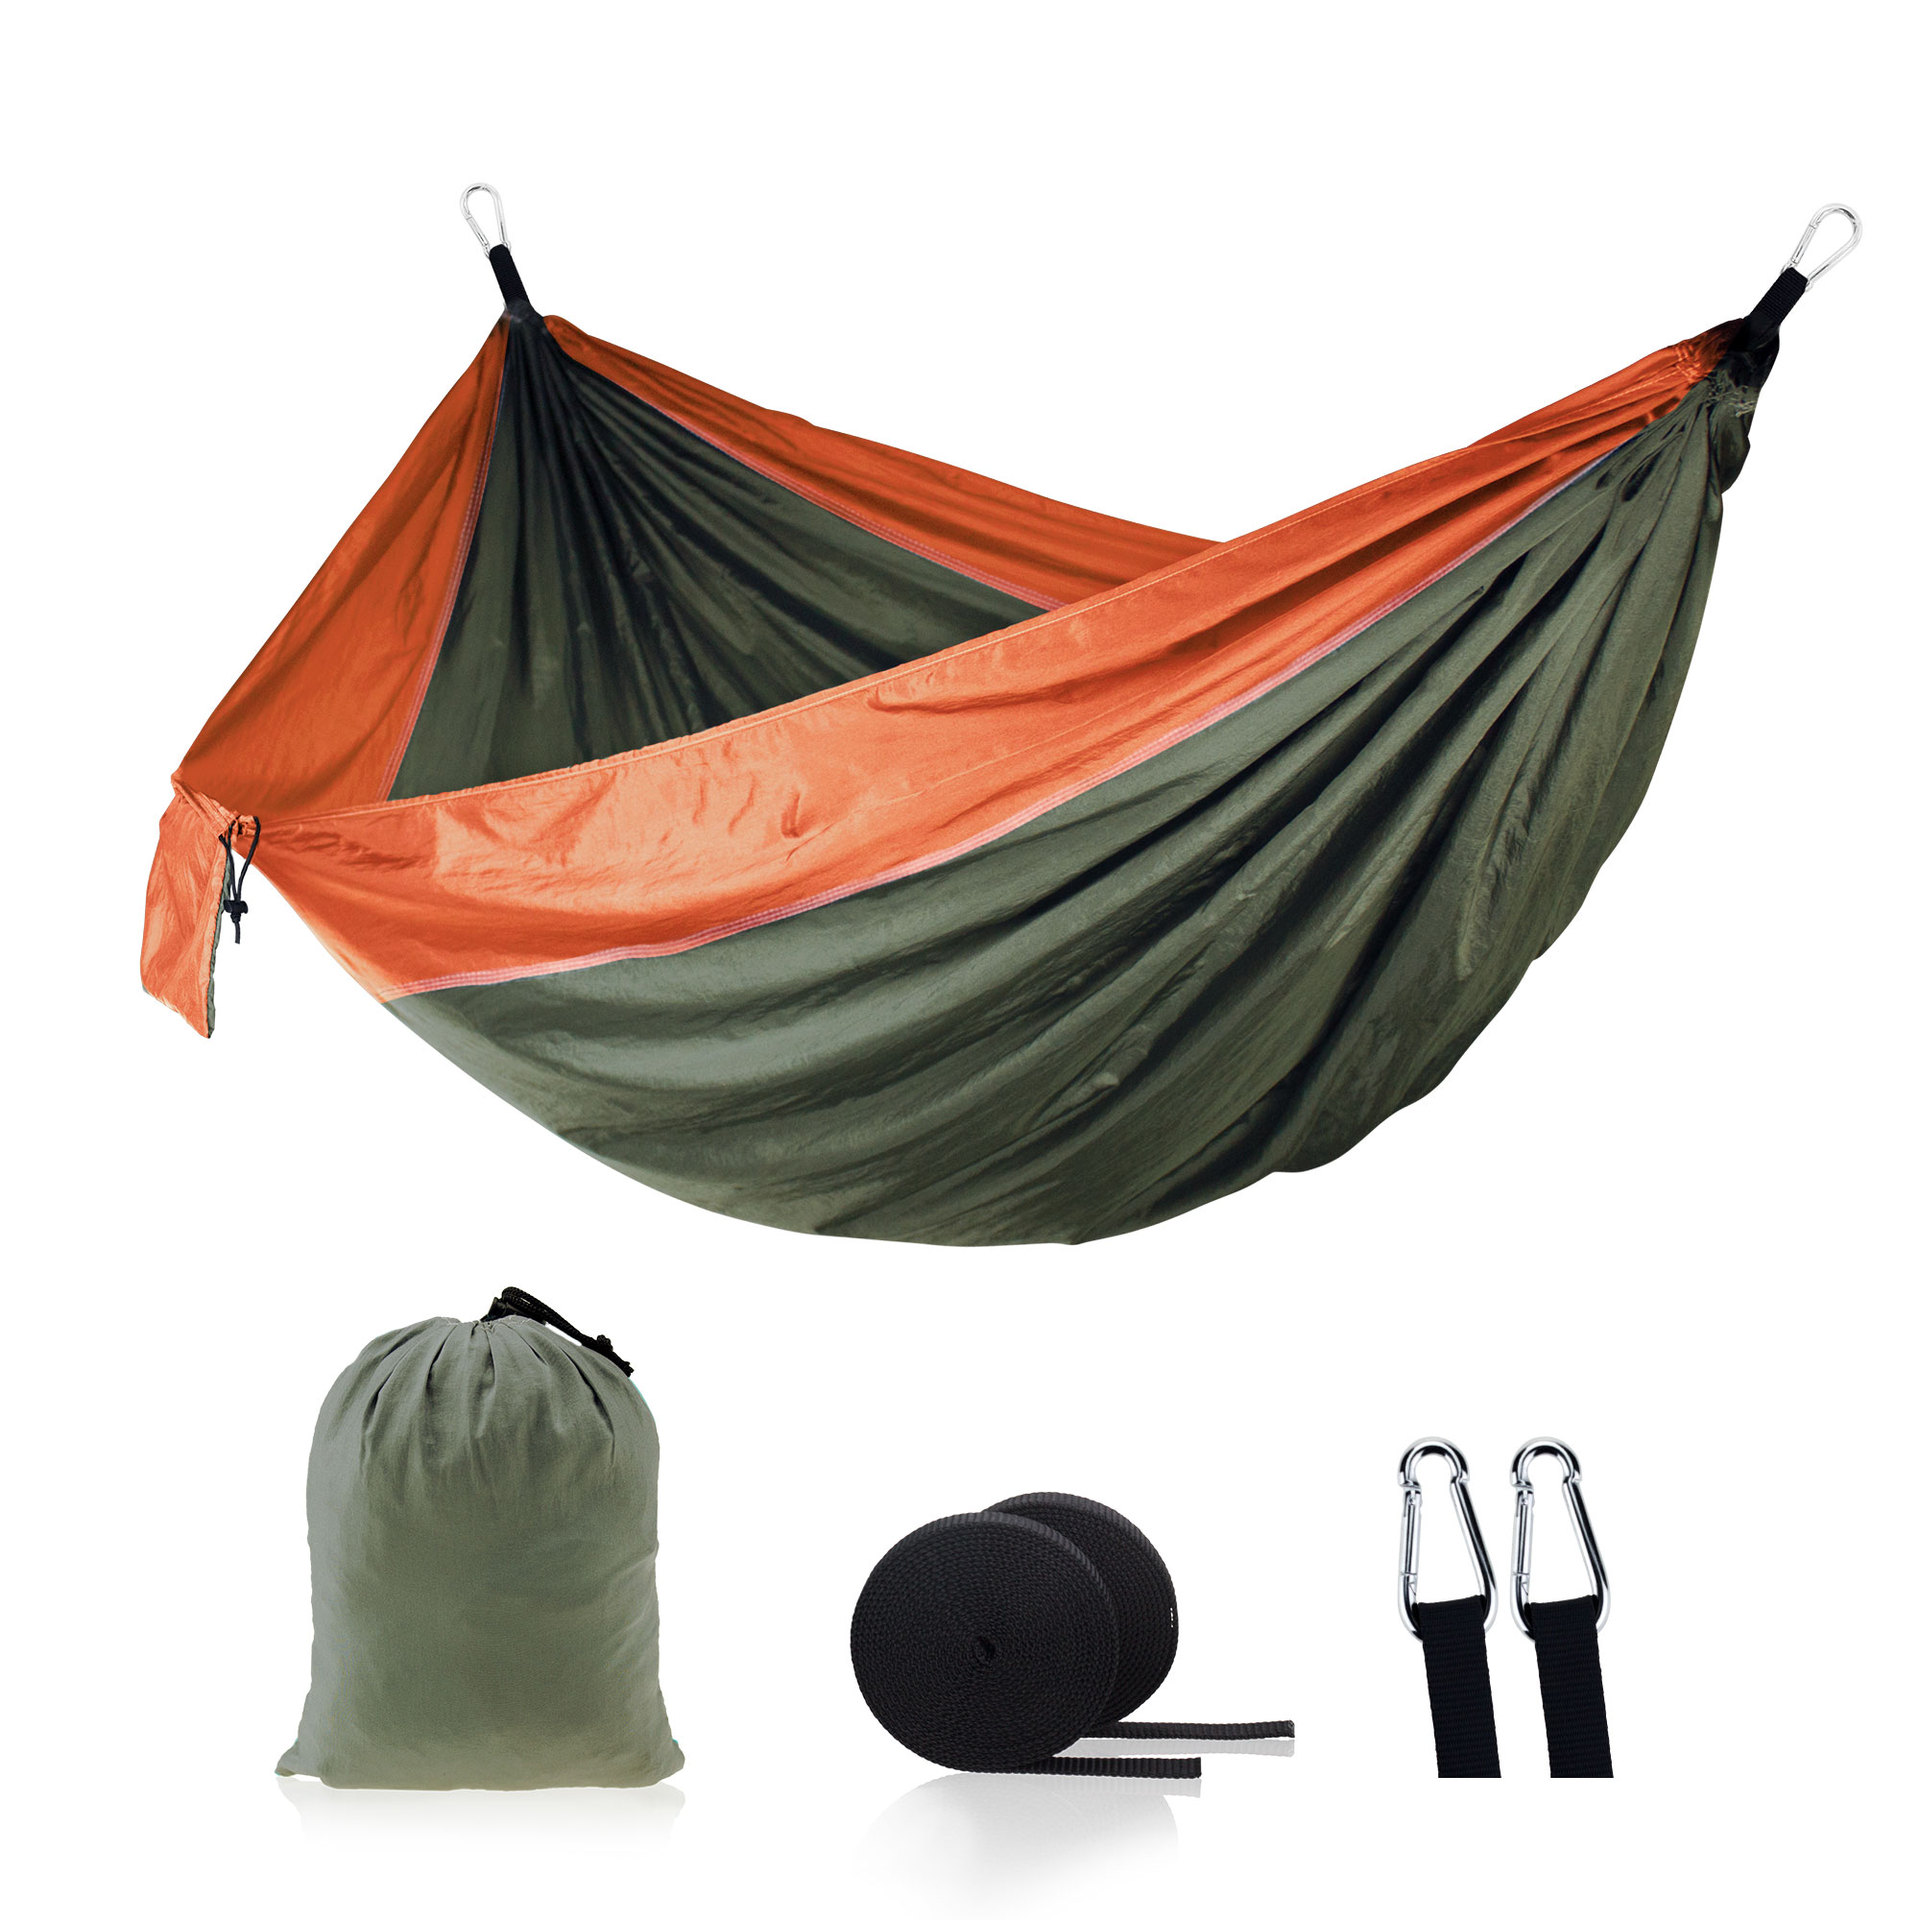 2022 High quality Outdoors Backpacking Survival or Travel Single & Double parachute Hammocks/camping hammock